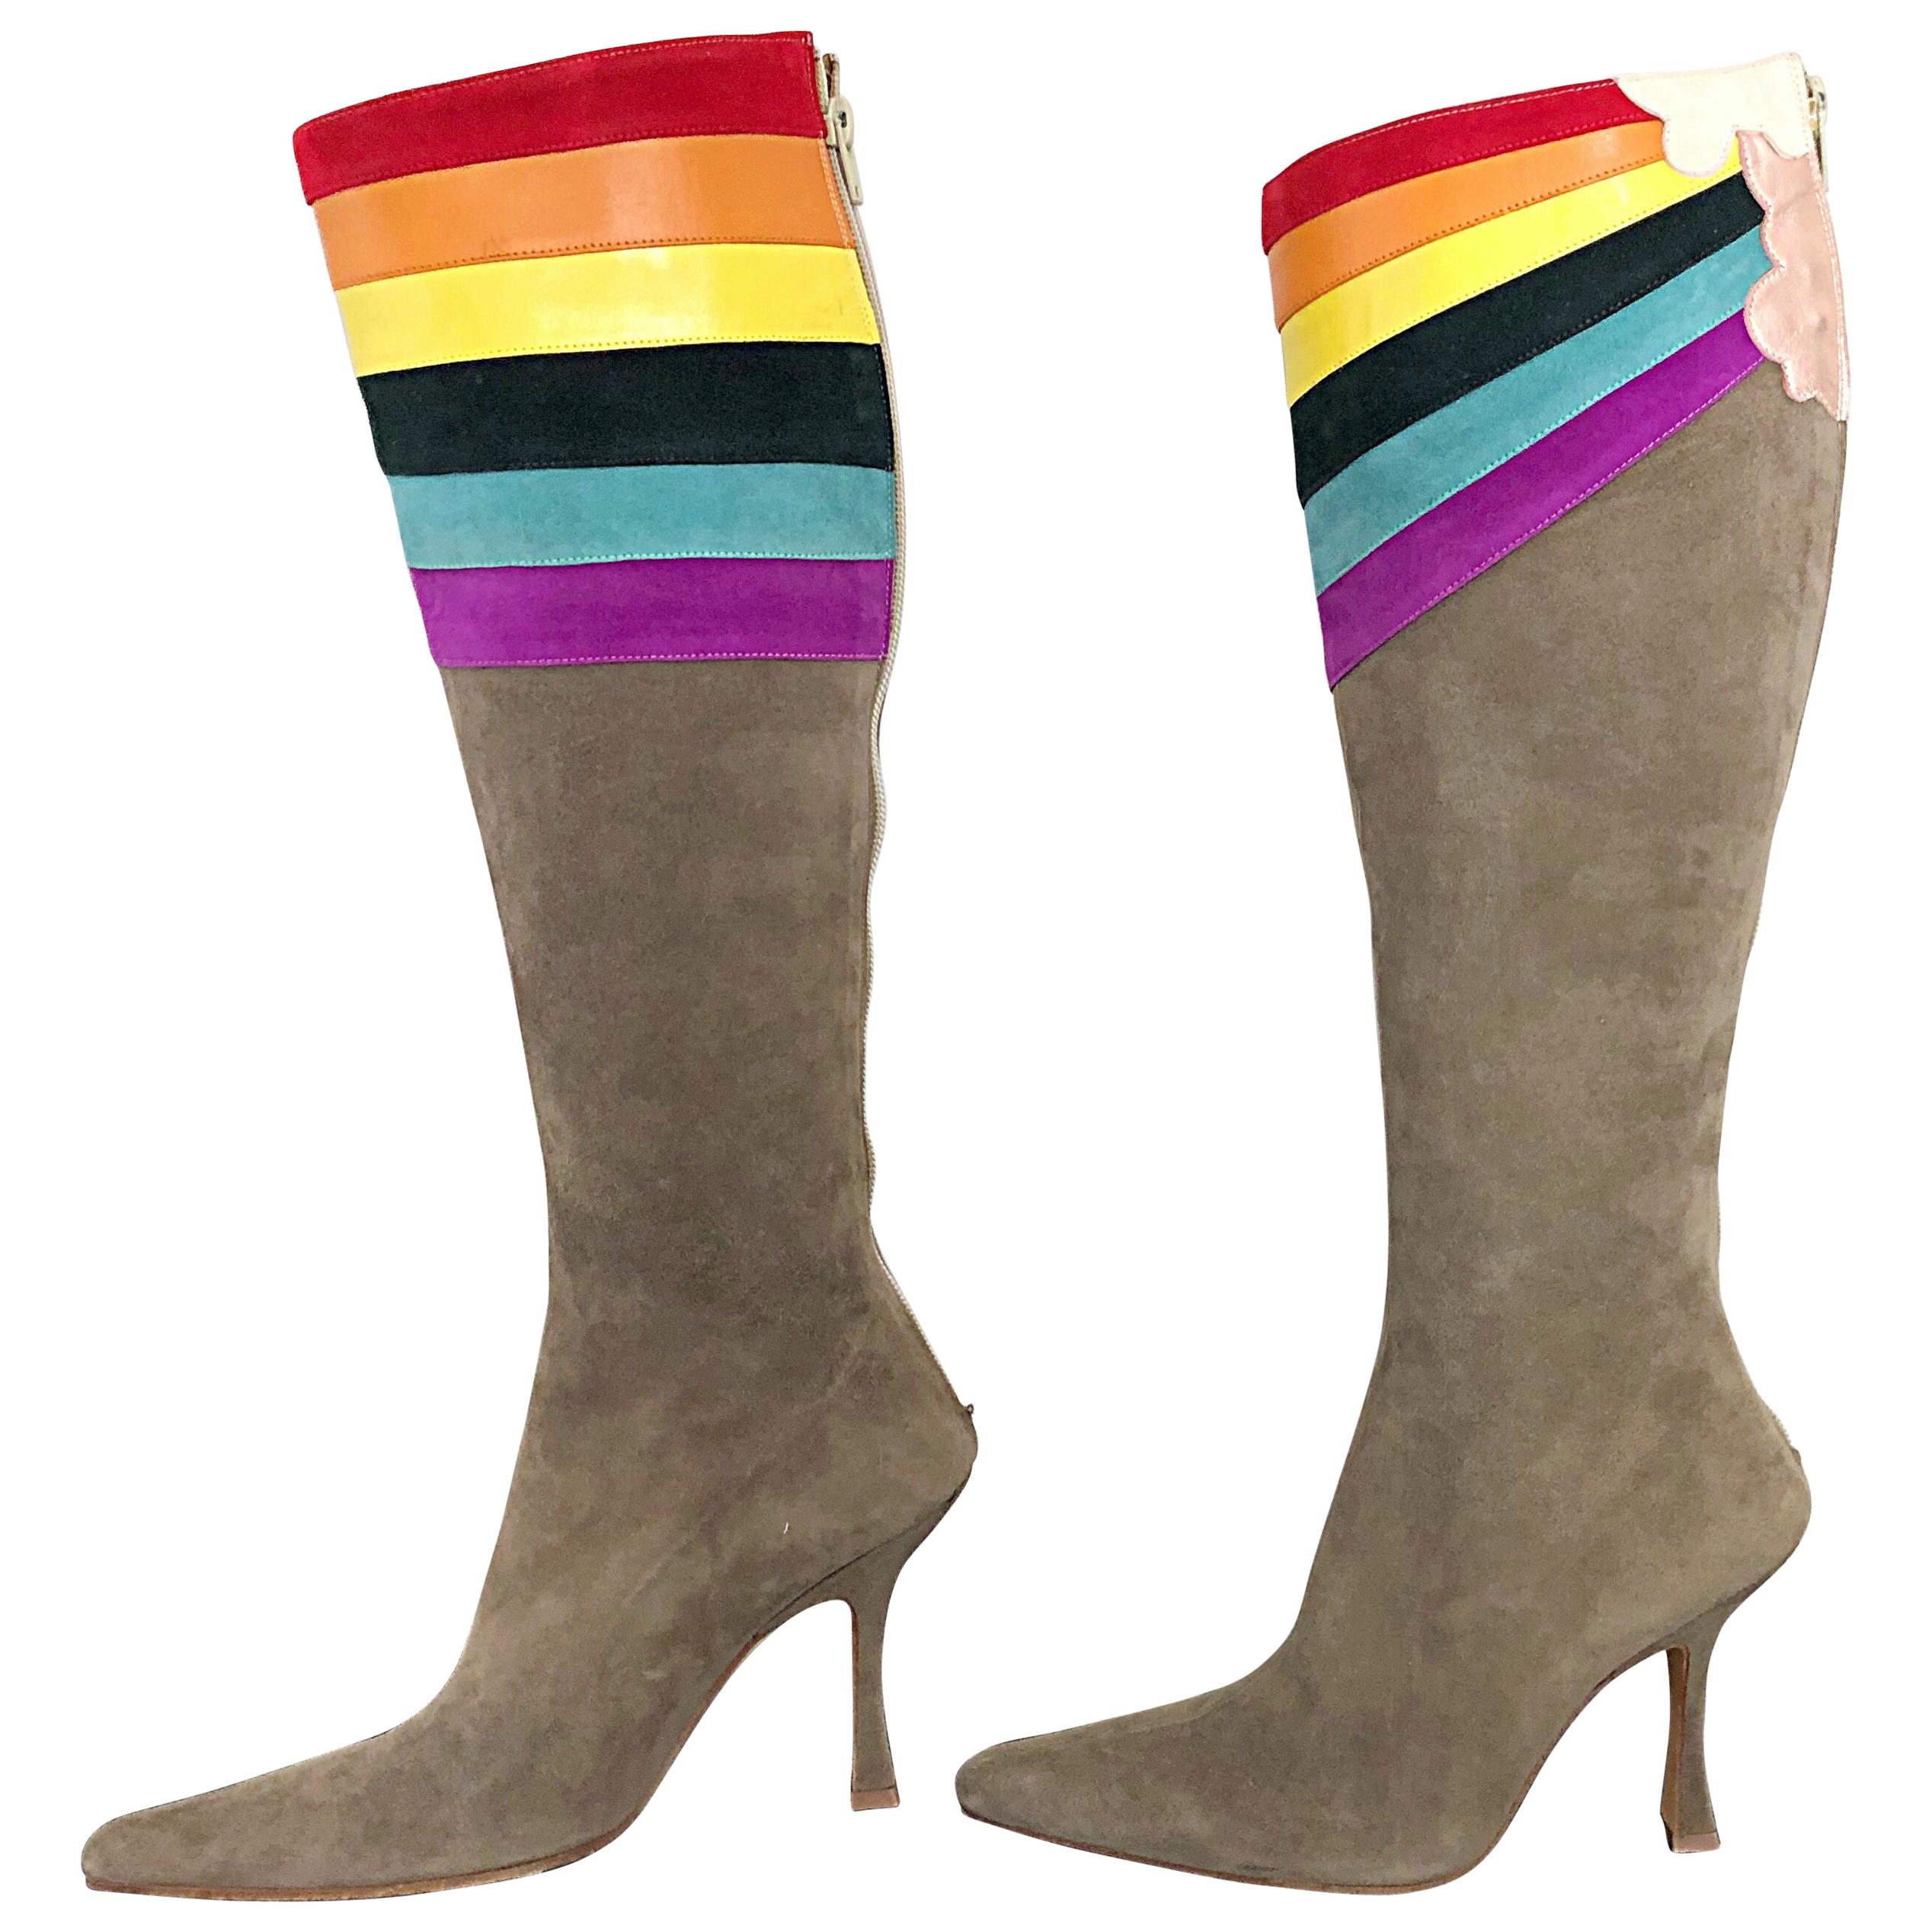 Amazing, rare impossible to find Ashley Dearborn 'Pegasus' taupe rainbow GAY PRIDE suede leather knee high heeled boots! From Dearborn's debut collection in 2009, these boots sold out immediately! Perfect taupe color matches everything. And, the